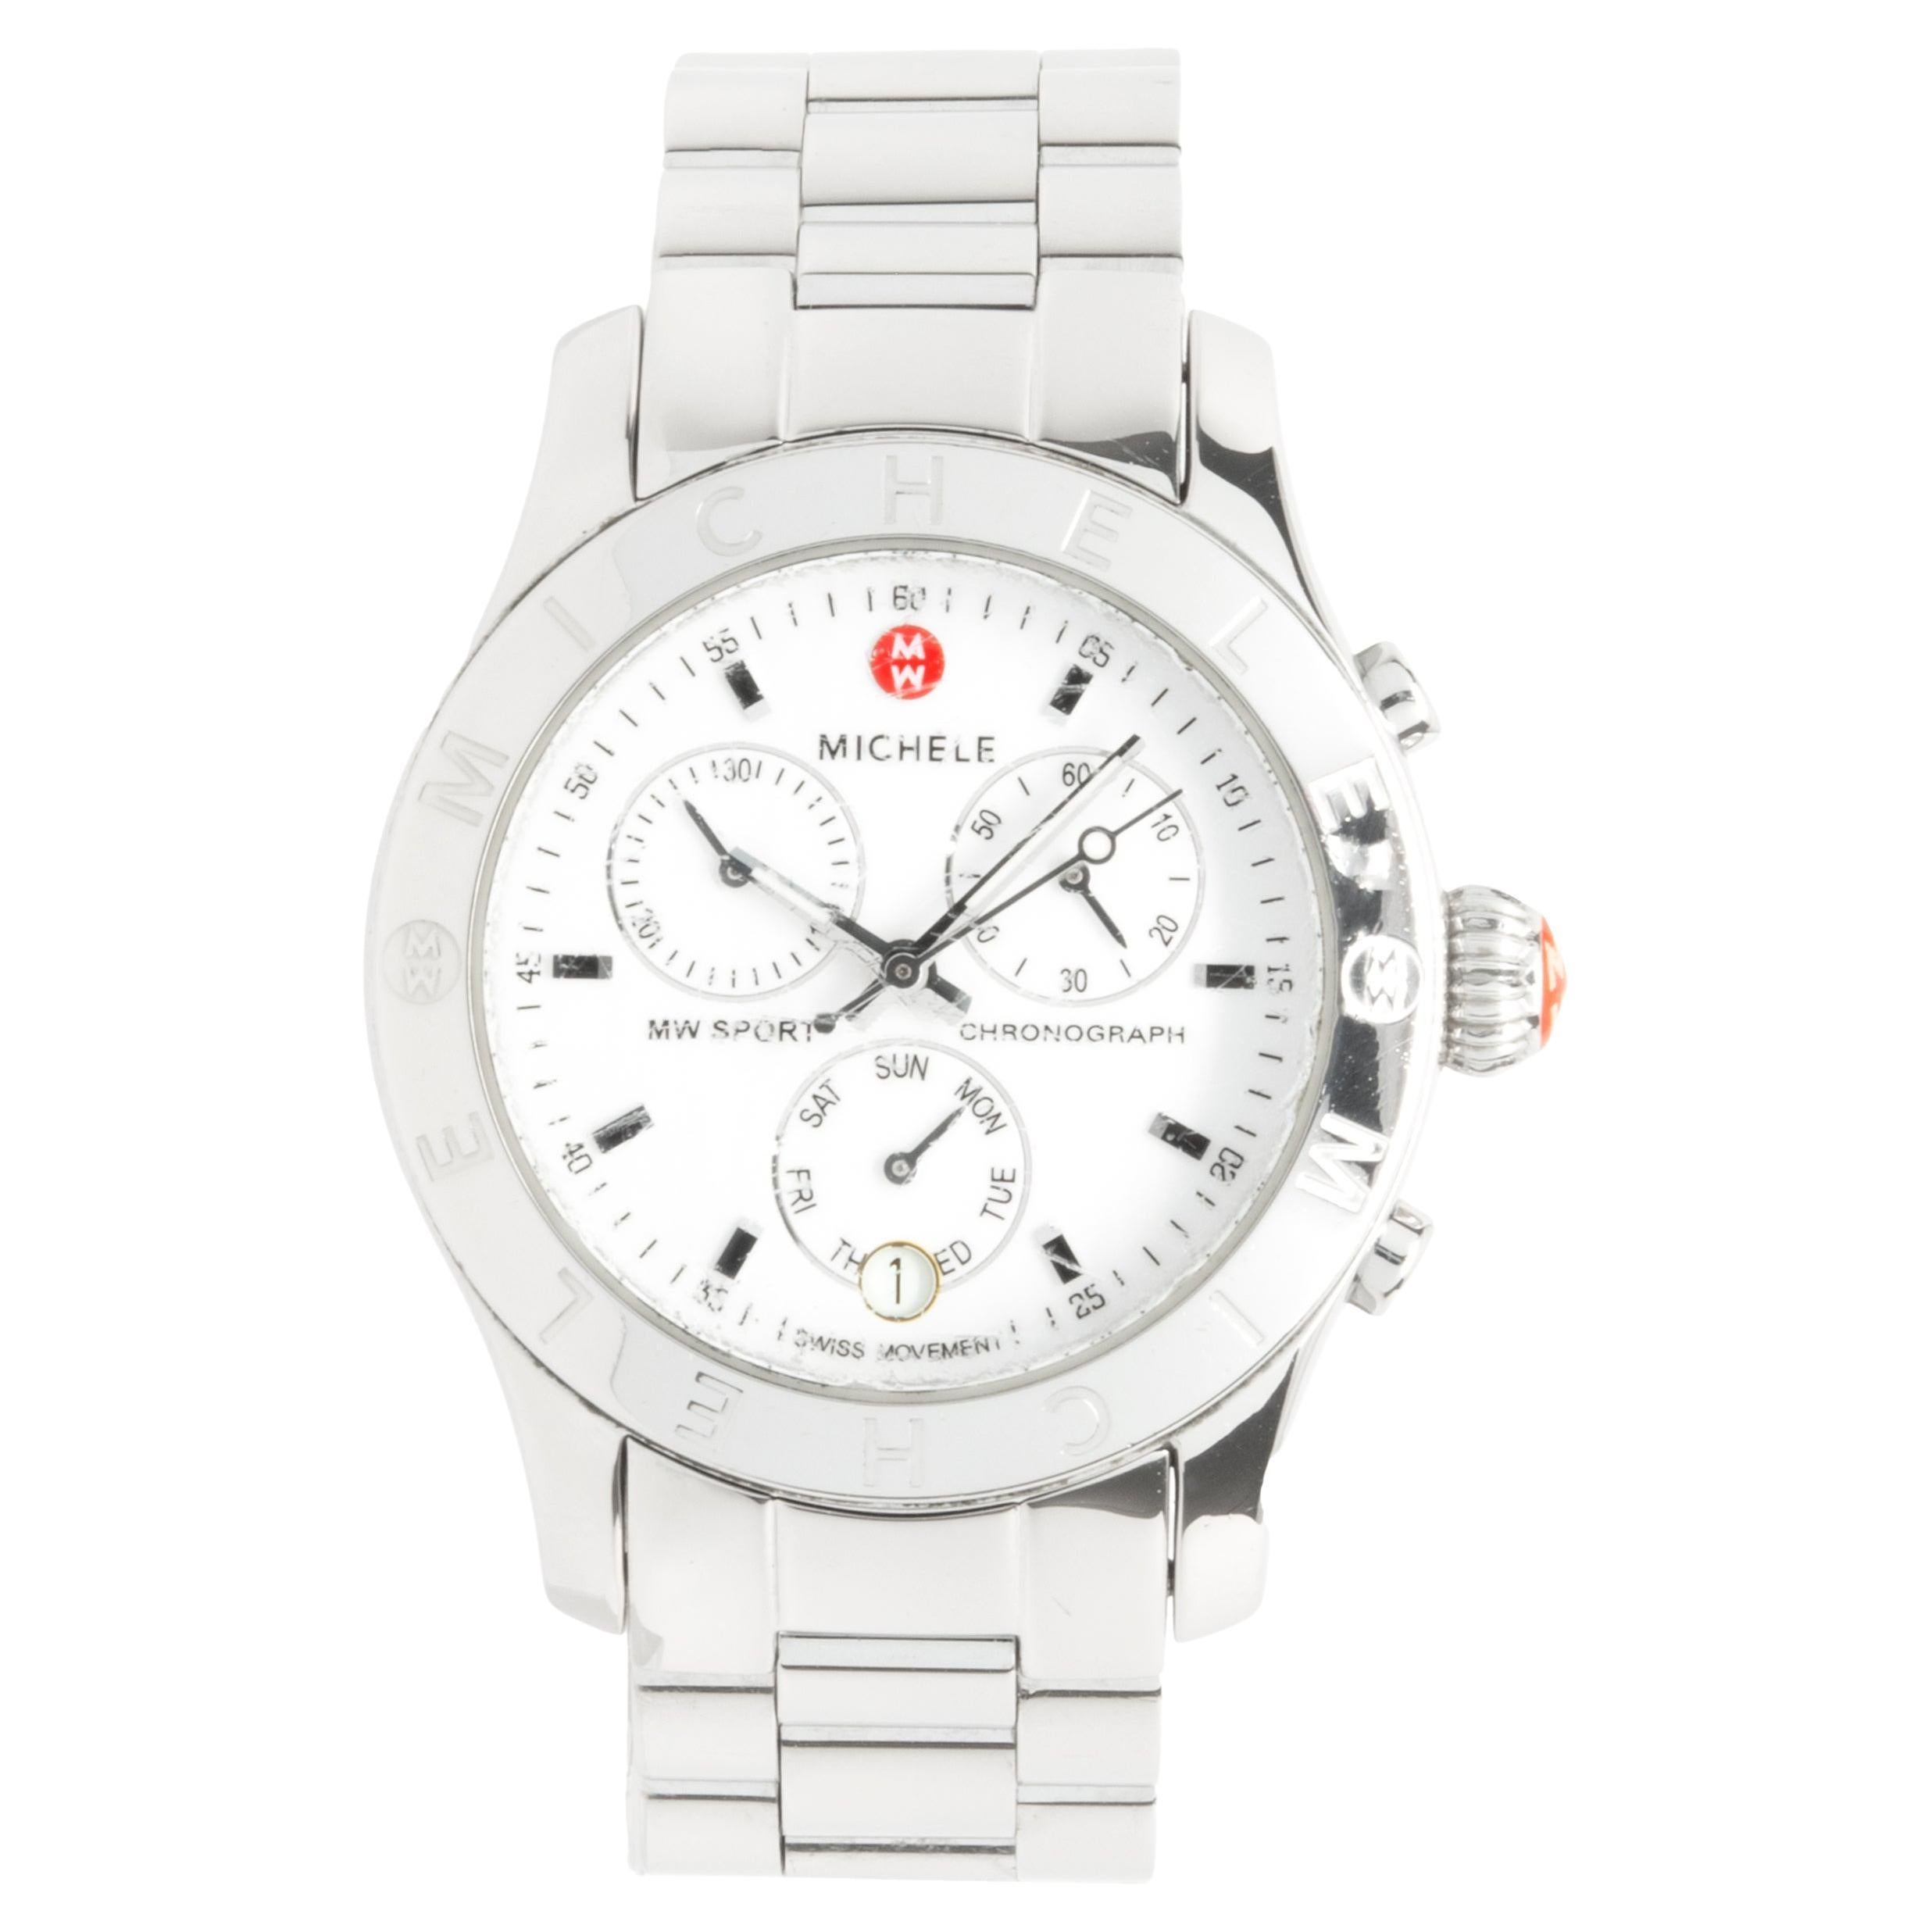 Michele Stainless Steel Sport Chronograph